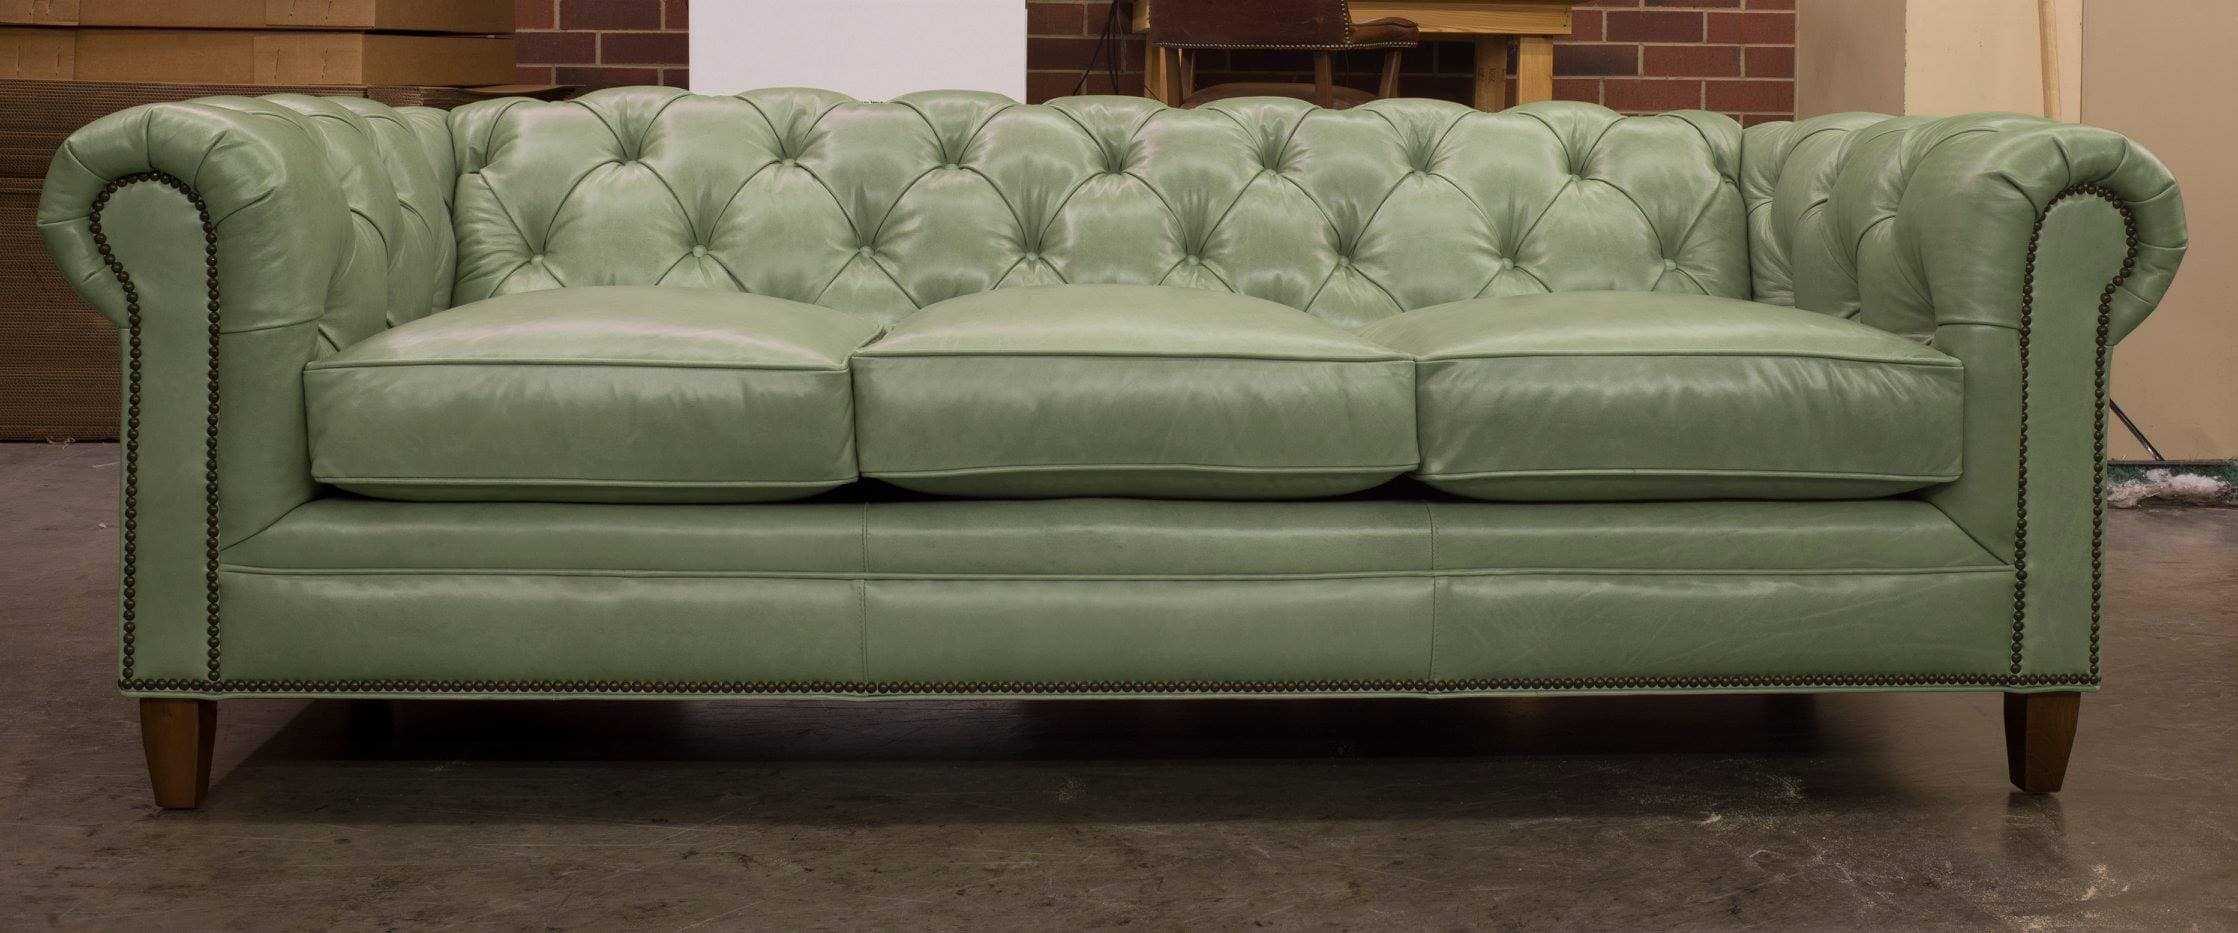 Fitzgerald Sage Leather Classic Chesterfield